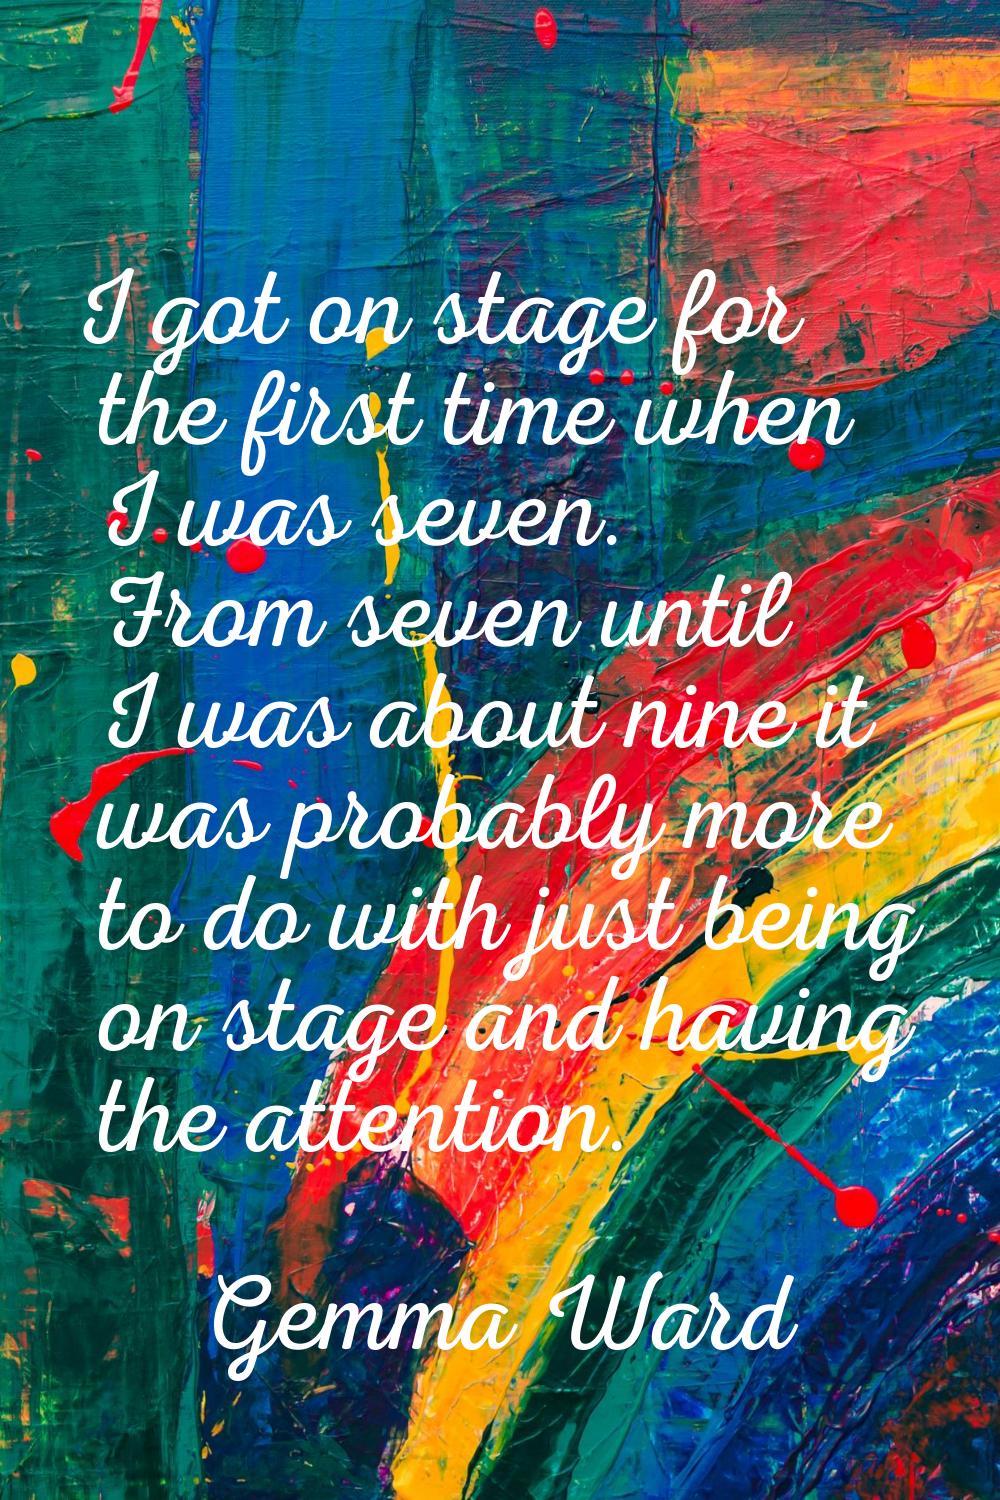 I got on stage for the first time when I was seven. From seven until I was about nine it was probab